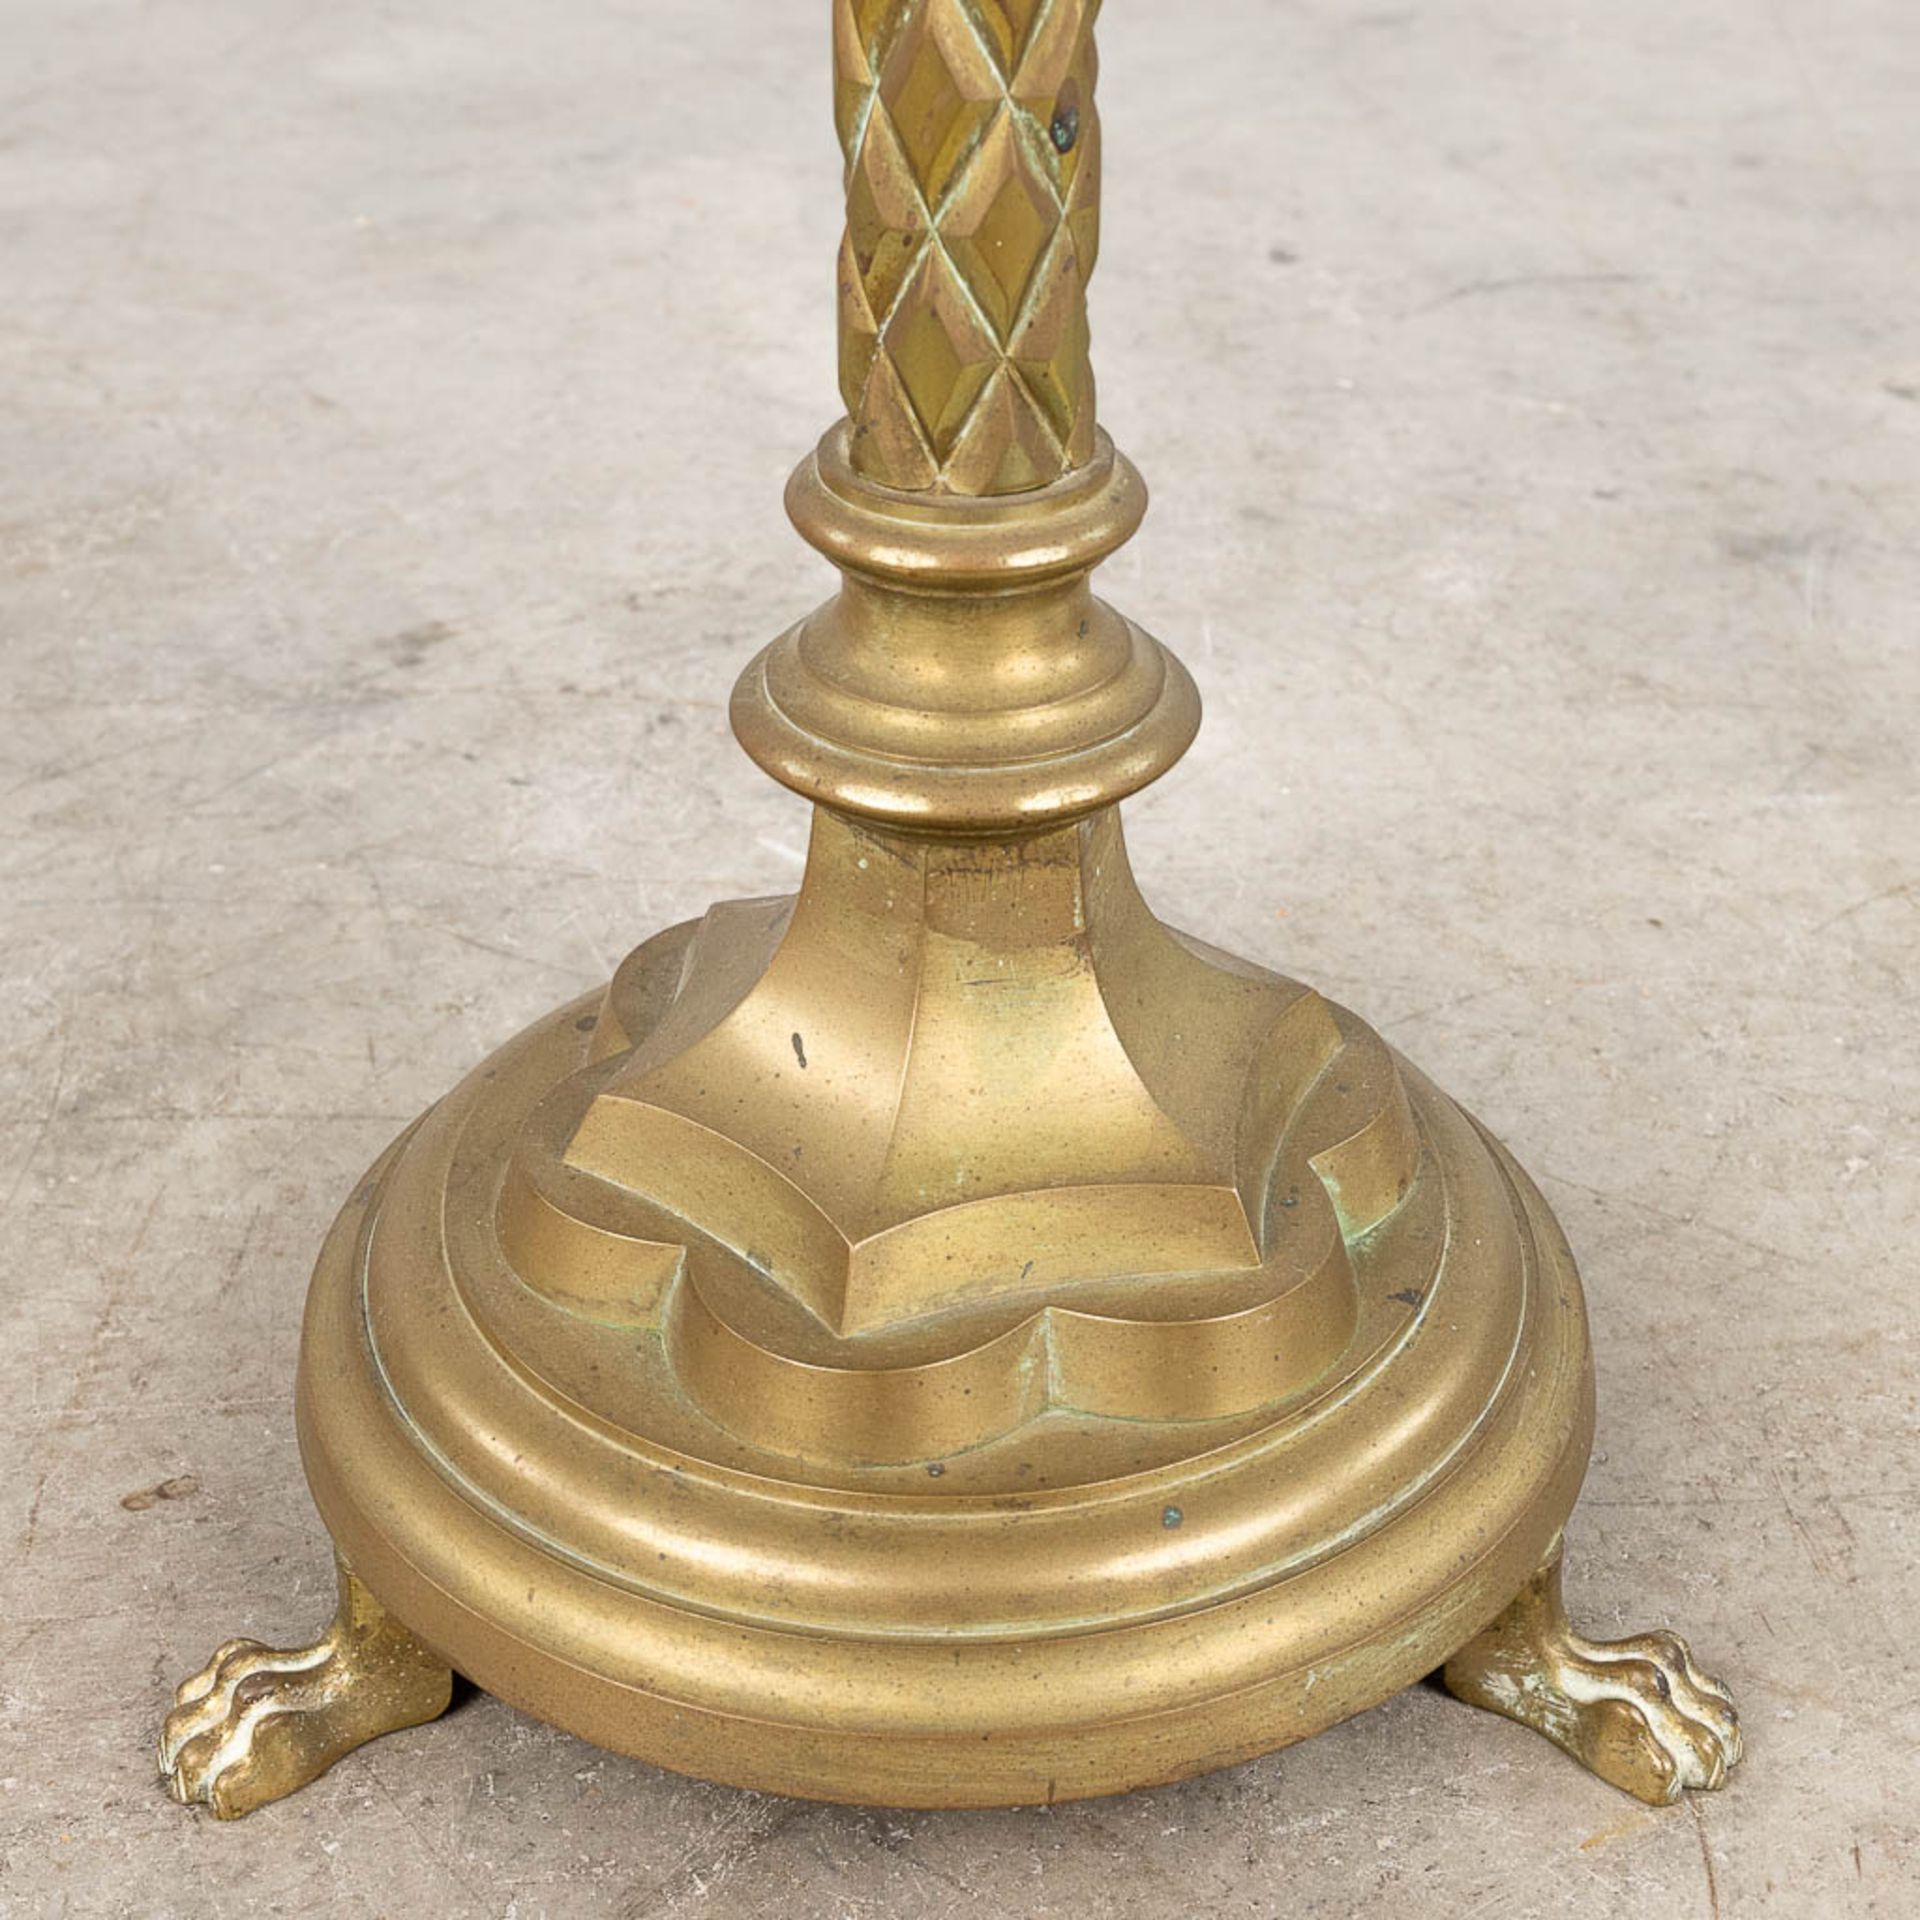 A large candlestick made of bronze, decorated with IHS logo. Gothic Revival style. (H: 92 cm) - Image 7 of 10